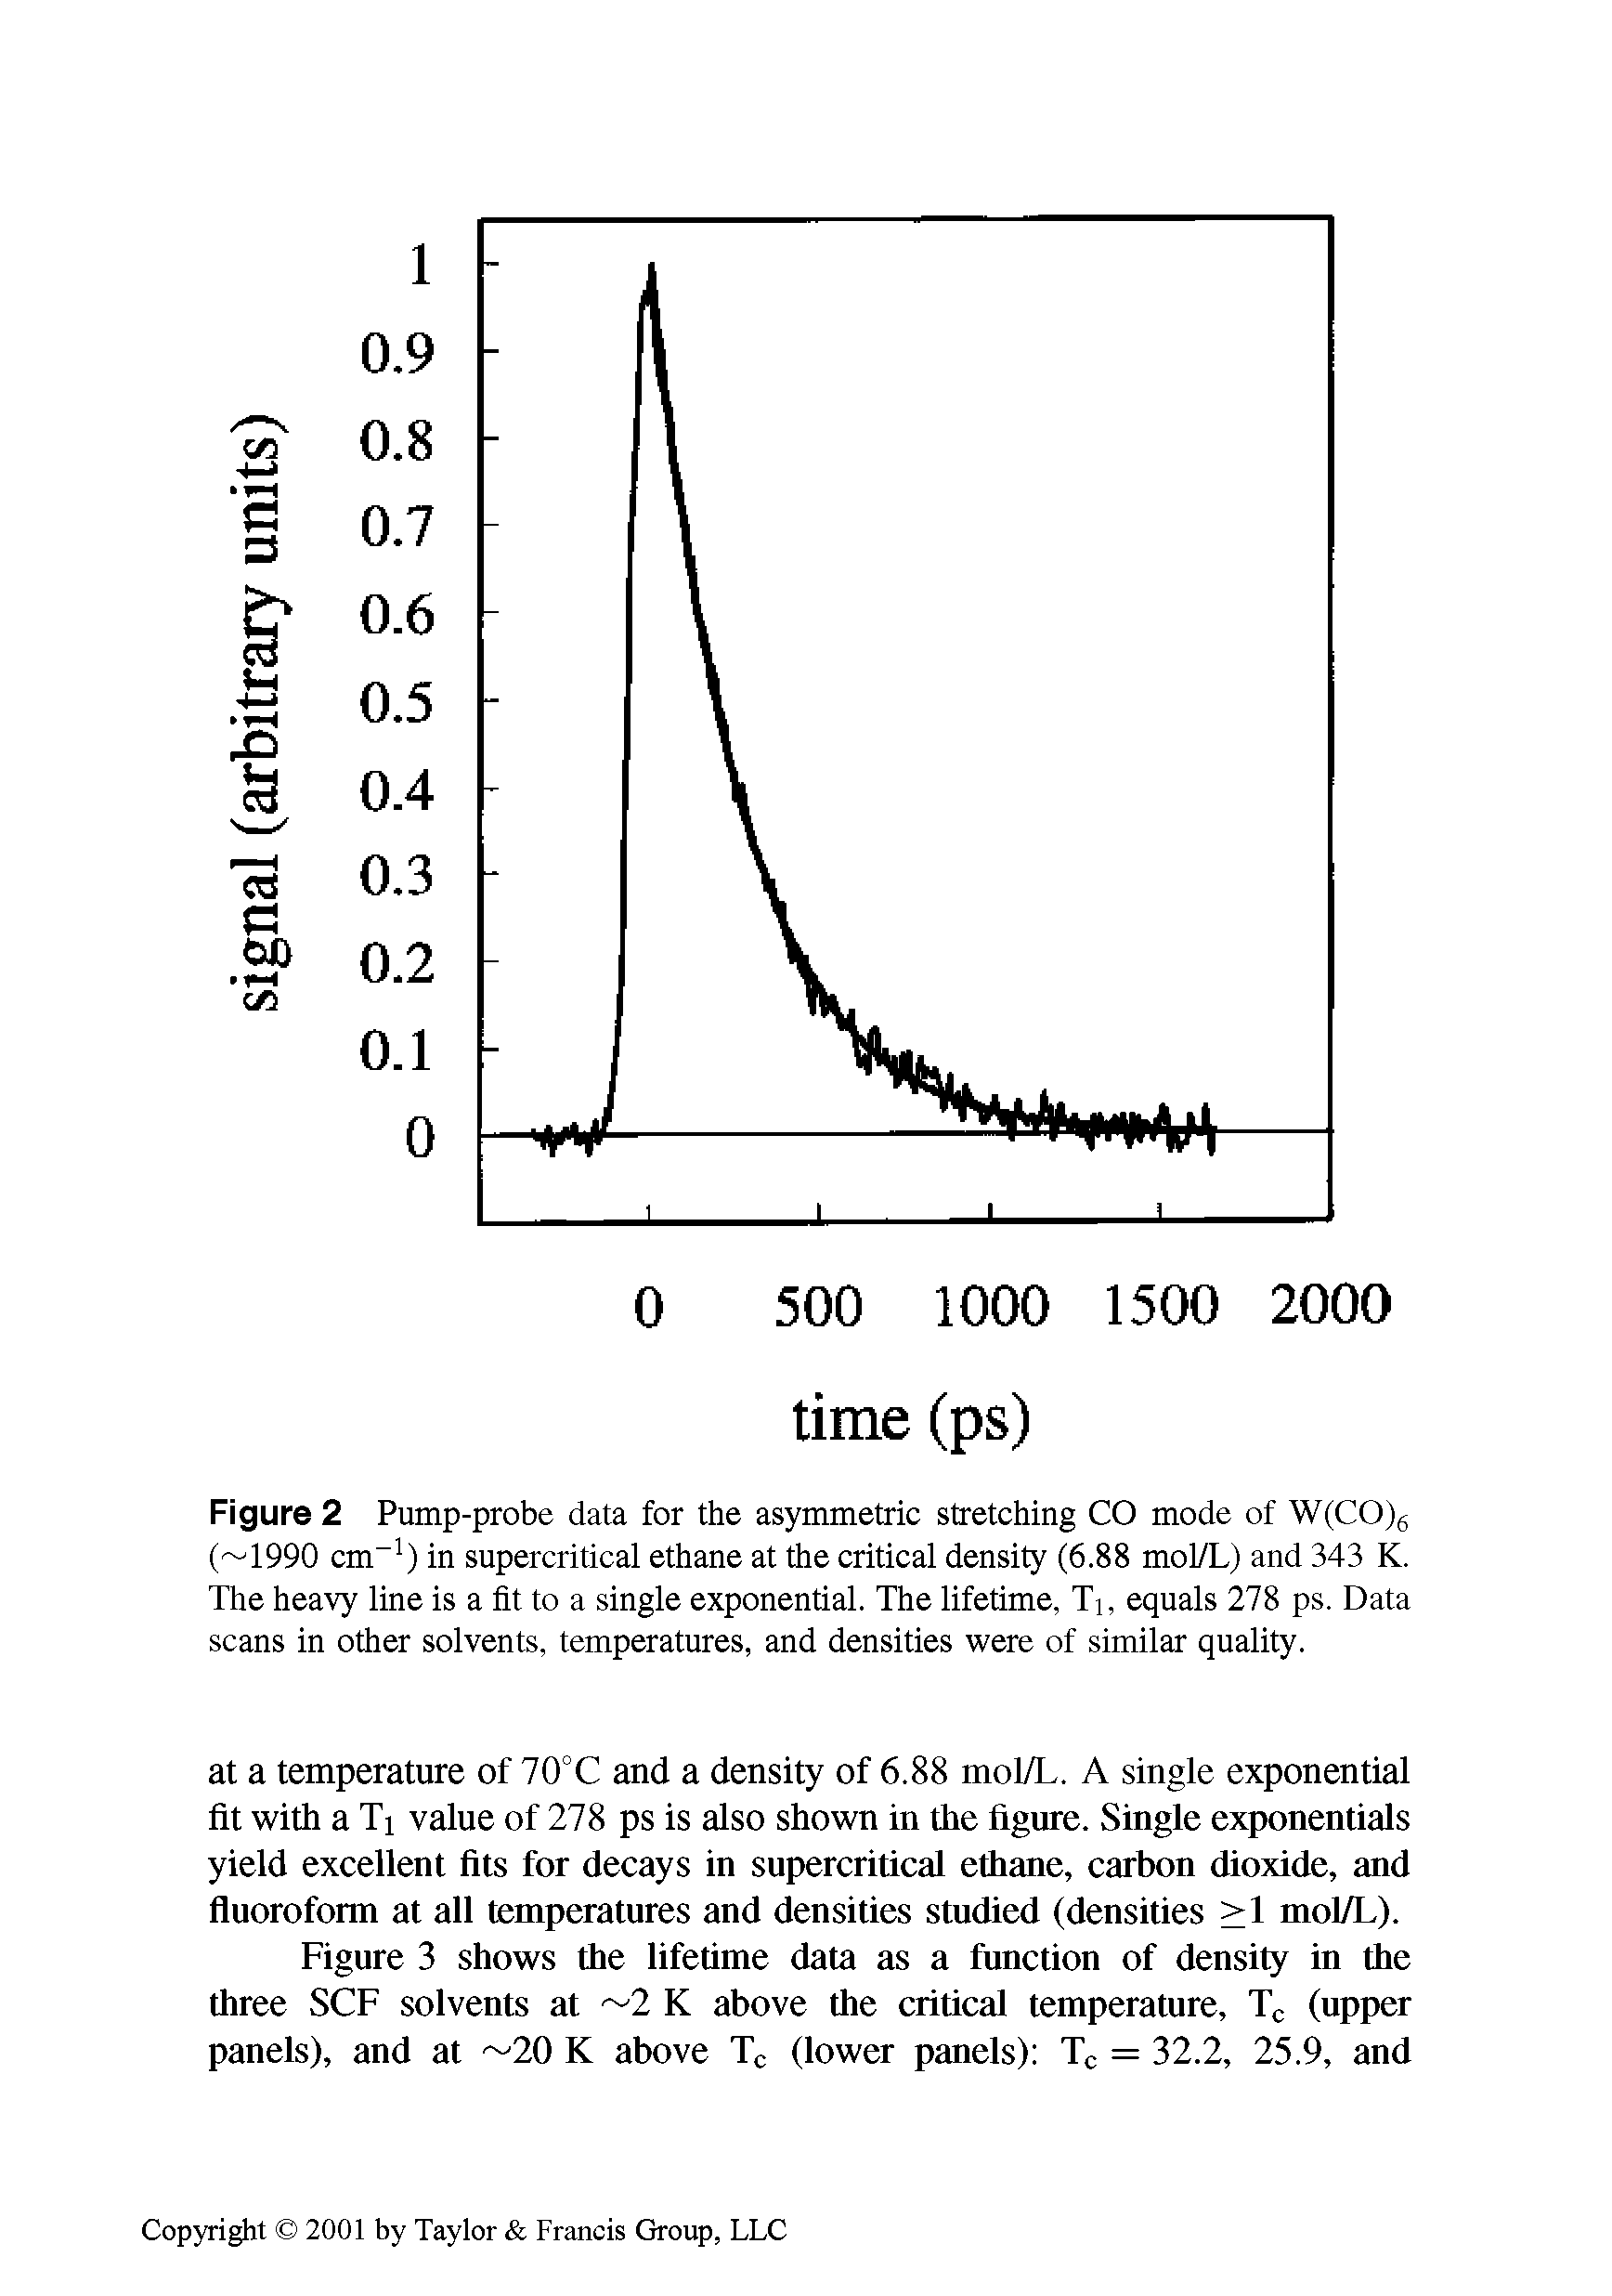 Figure 2 Pump-probe data for the asymmetric stretching CO mode of W(CO)6 ( 1990 cm-1) in supercritical ethane at the critical density (6.88 mol/L) and 343 K. The heavy line is a fit to a single exponential. The lifetime, Ti, equals 278 ps. Data scans in other solvents, temperatures, and densities were of similar quality.